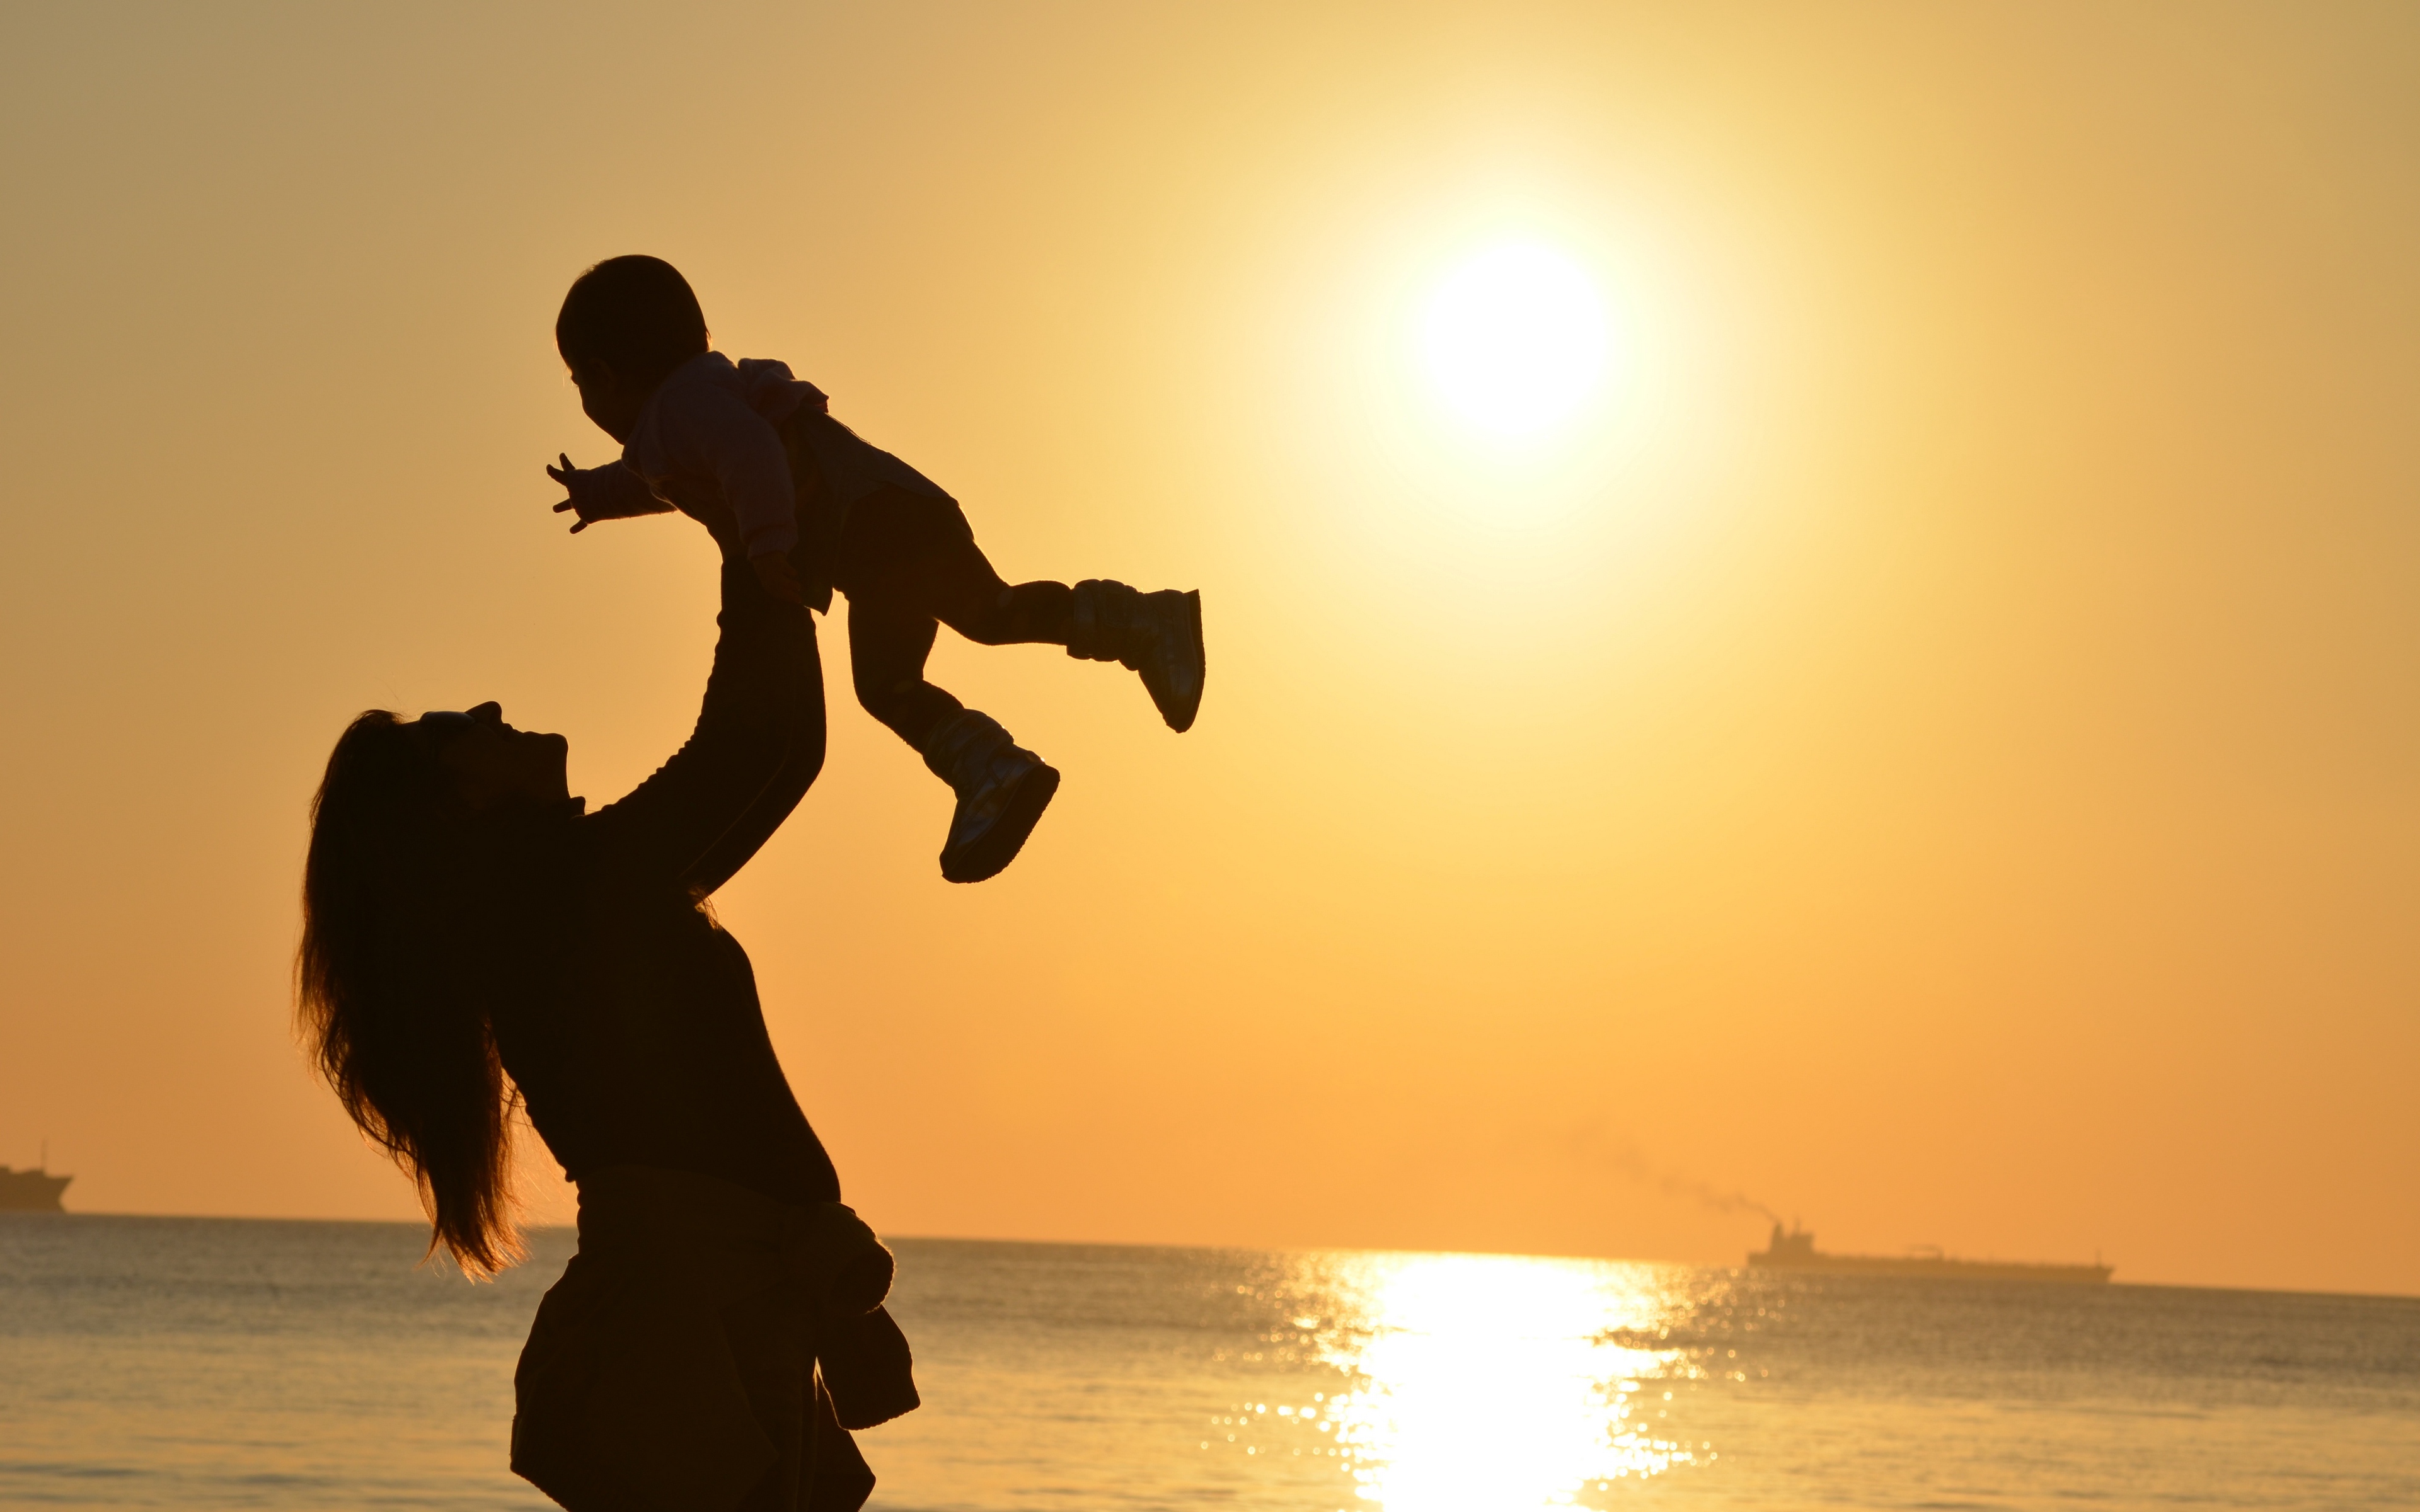 Download wallpapers 3840x2400 mother, child, silhouettes.